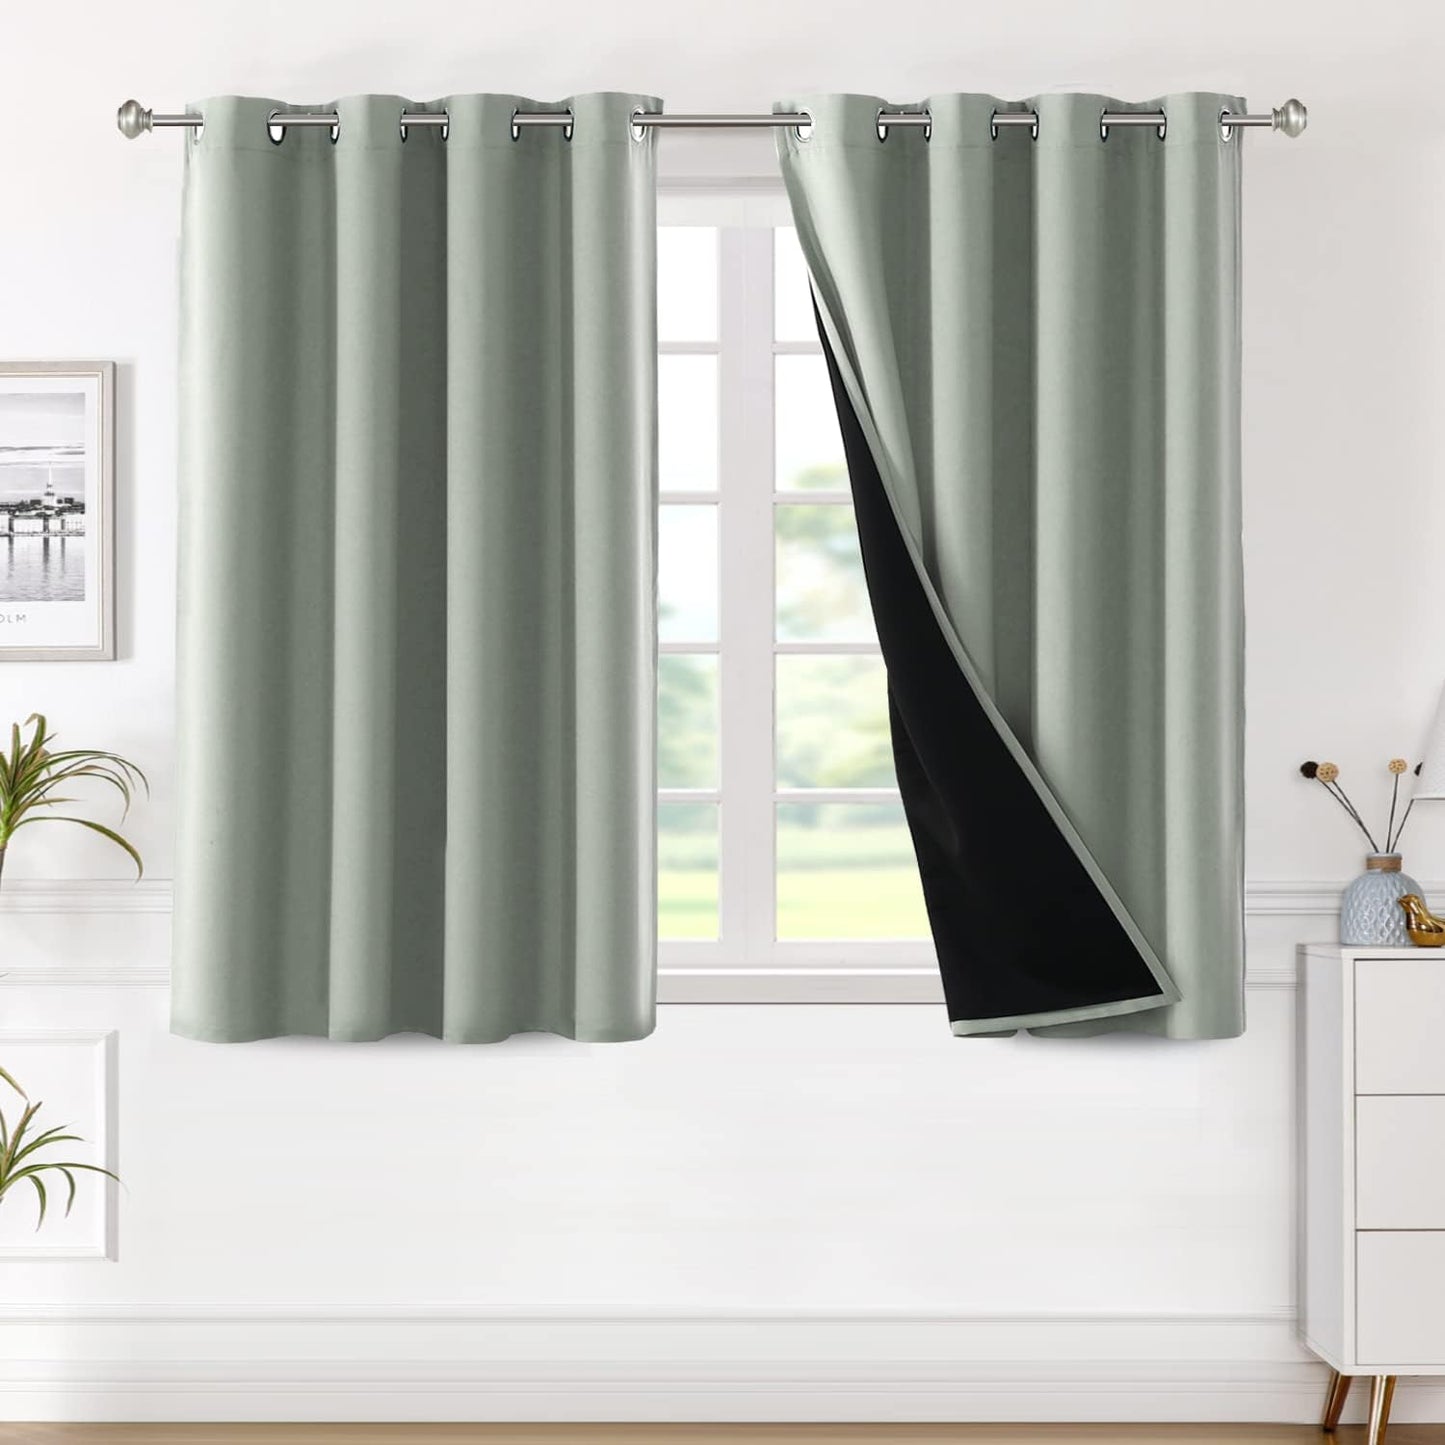 H.VERSAILTEX Blackout Curtains with Liner Backing, Thermal Insulated Curtains for Living Room, Noise Reducing Drapes, White, 52 Inches Wide X 96 Inches Long per Panel, Set of 2 Panels  H.VERSAILTEX Sage 52"W X 45"L 